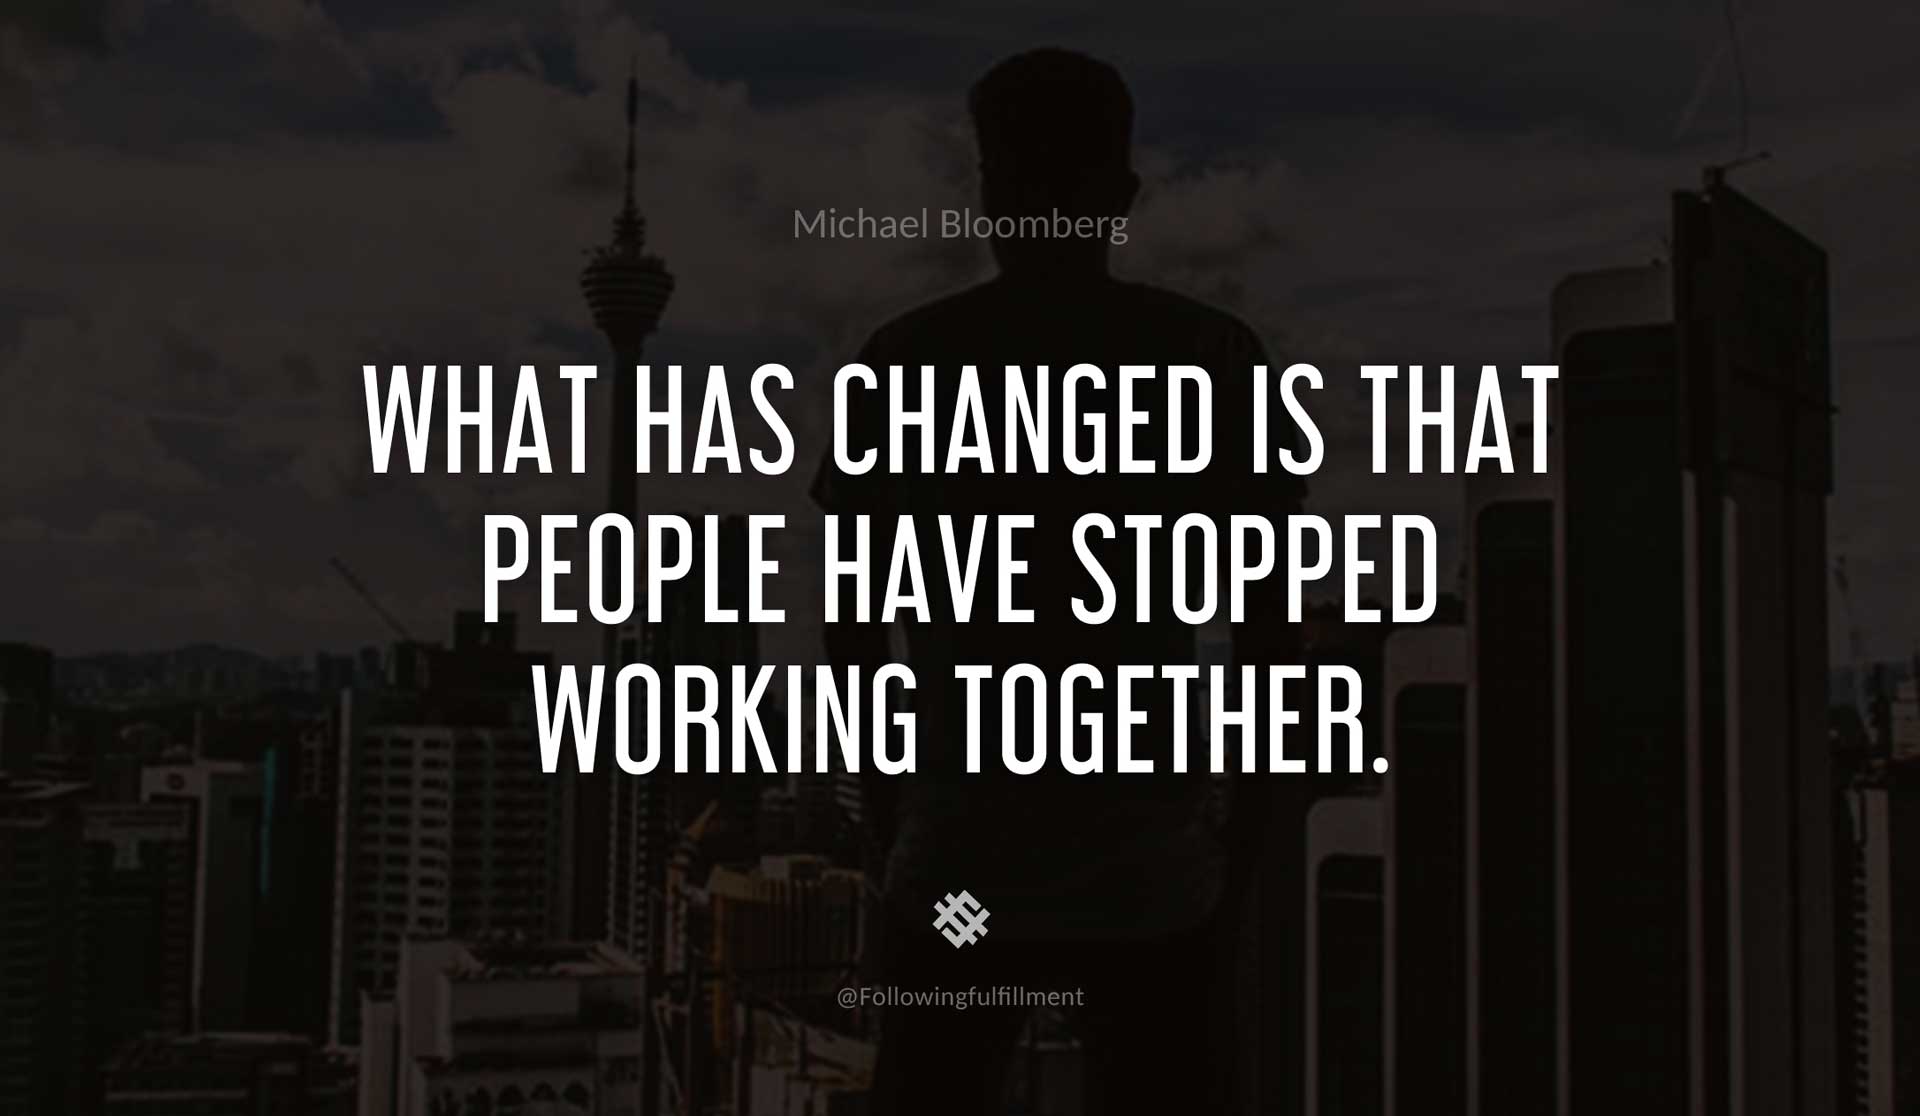 What-has-changed-is-that-people-have-stopped-working-together.-MICHAEL-BLOOMBERG-Quote.jpg